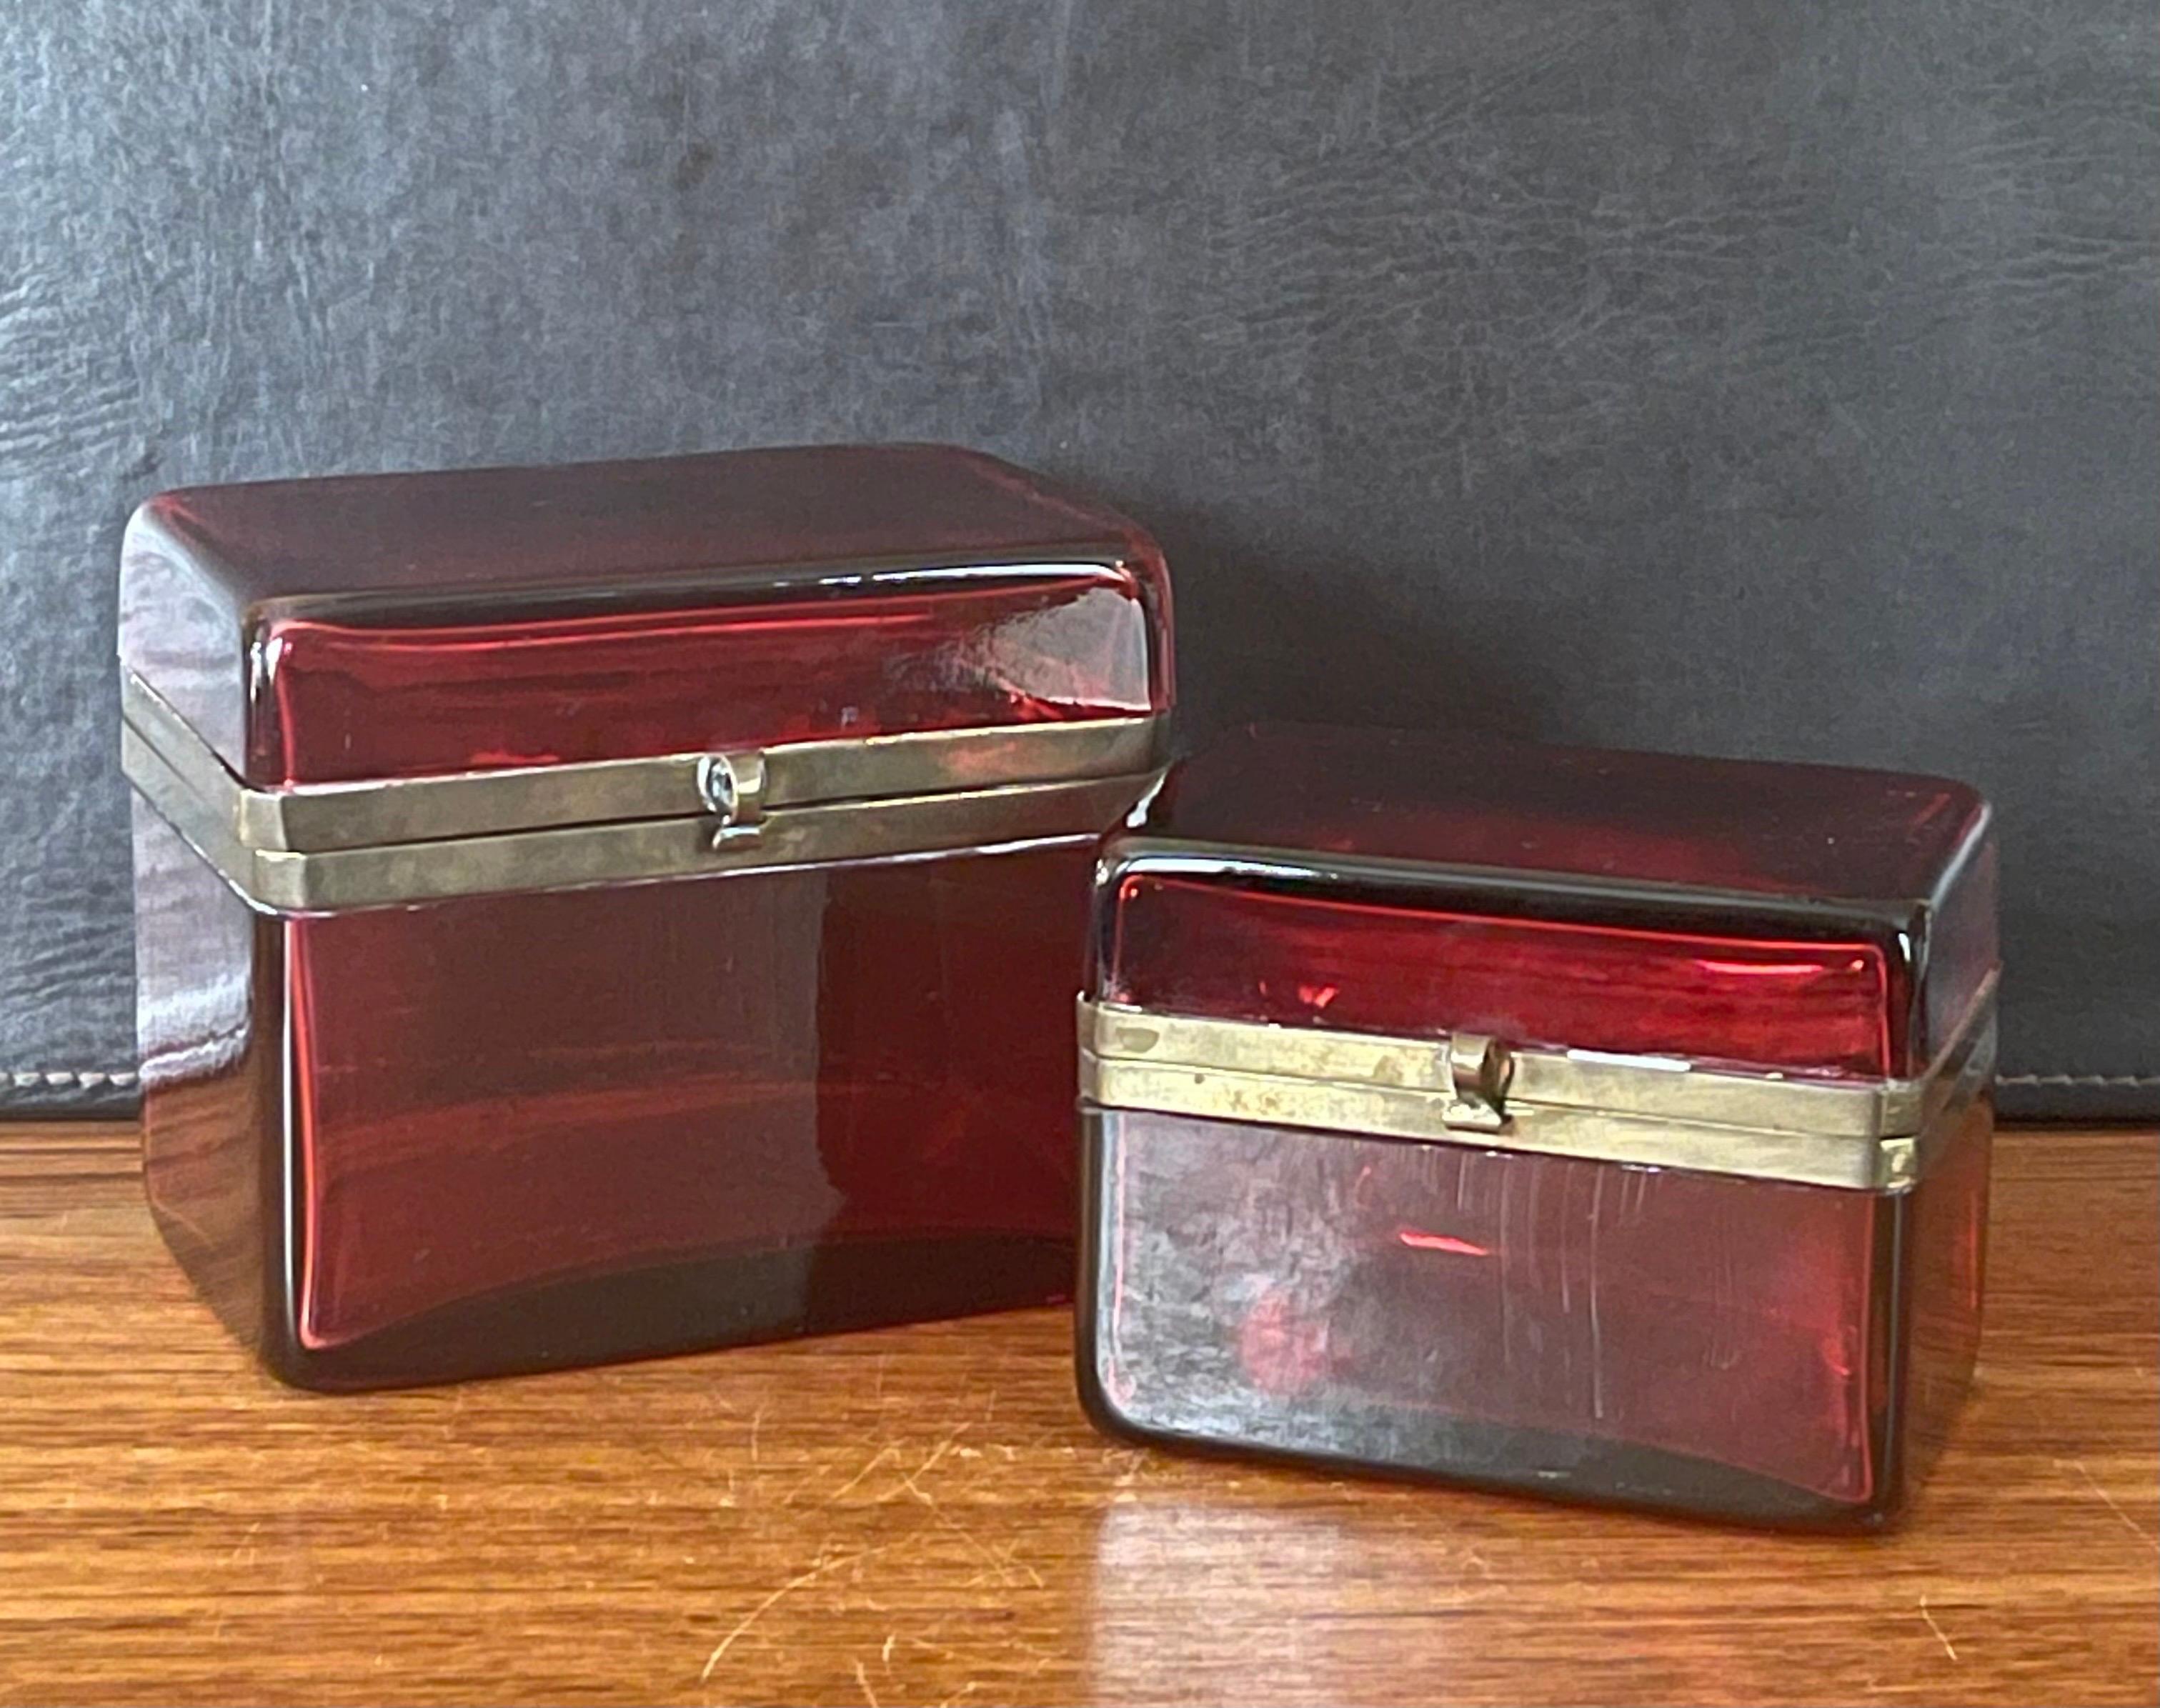 A fabulous pair of French Victorian era cranberry glass lidded boxes, circa late 1800's. The boxes are made of a thick cranberry colored glass with bronze dore latch and trim. The set is in very good antique condition with no chips or cracks; the